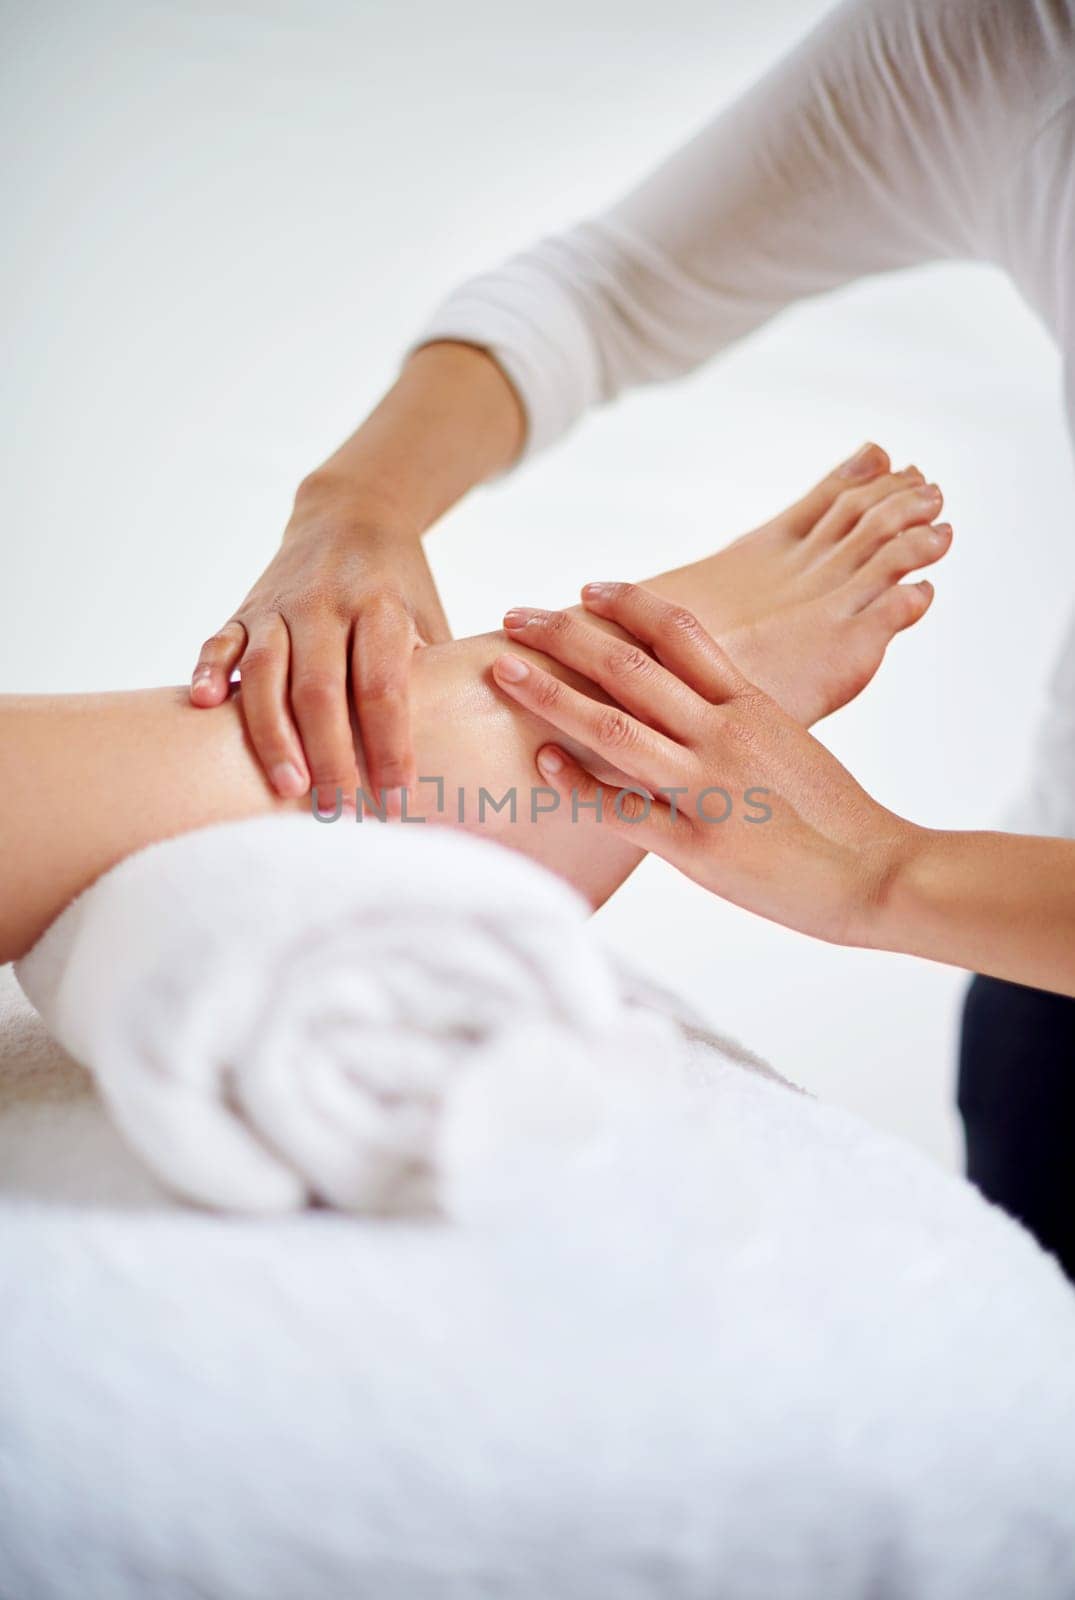 Foot, hands and masseuse with massage at spa for treatment, beauty and skincare at luxury resort with wellness. Pedicure, cosmetics and people for physical therapy, healing for self care and relief.